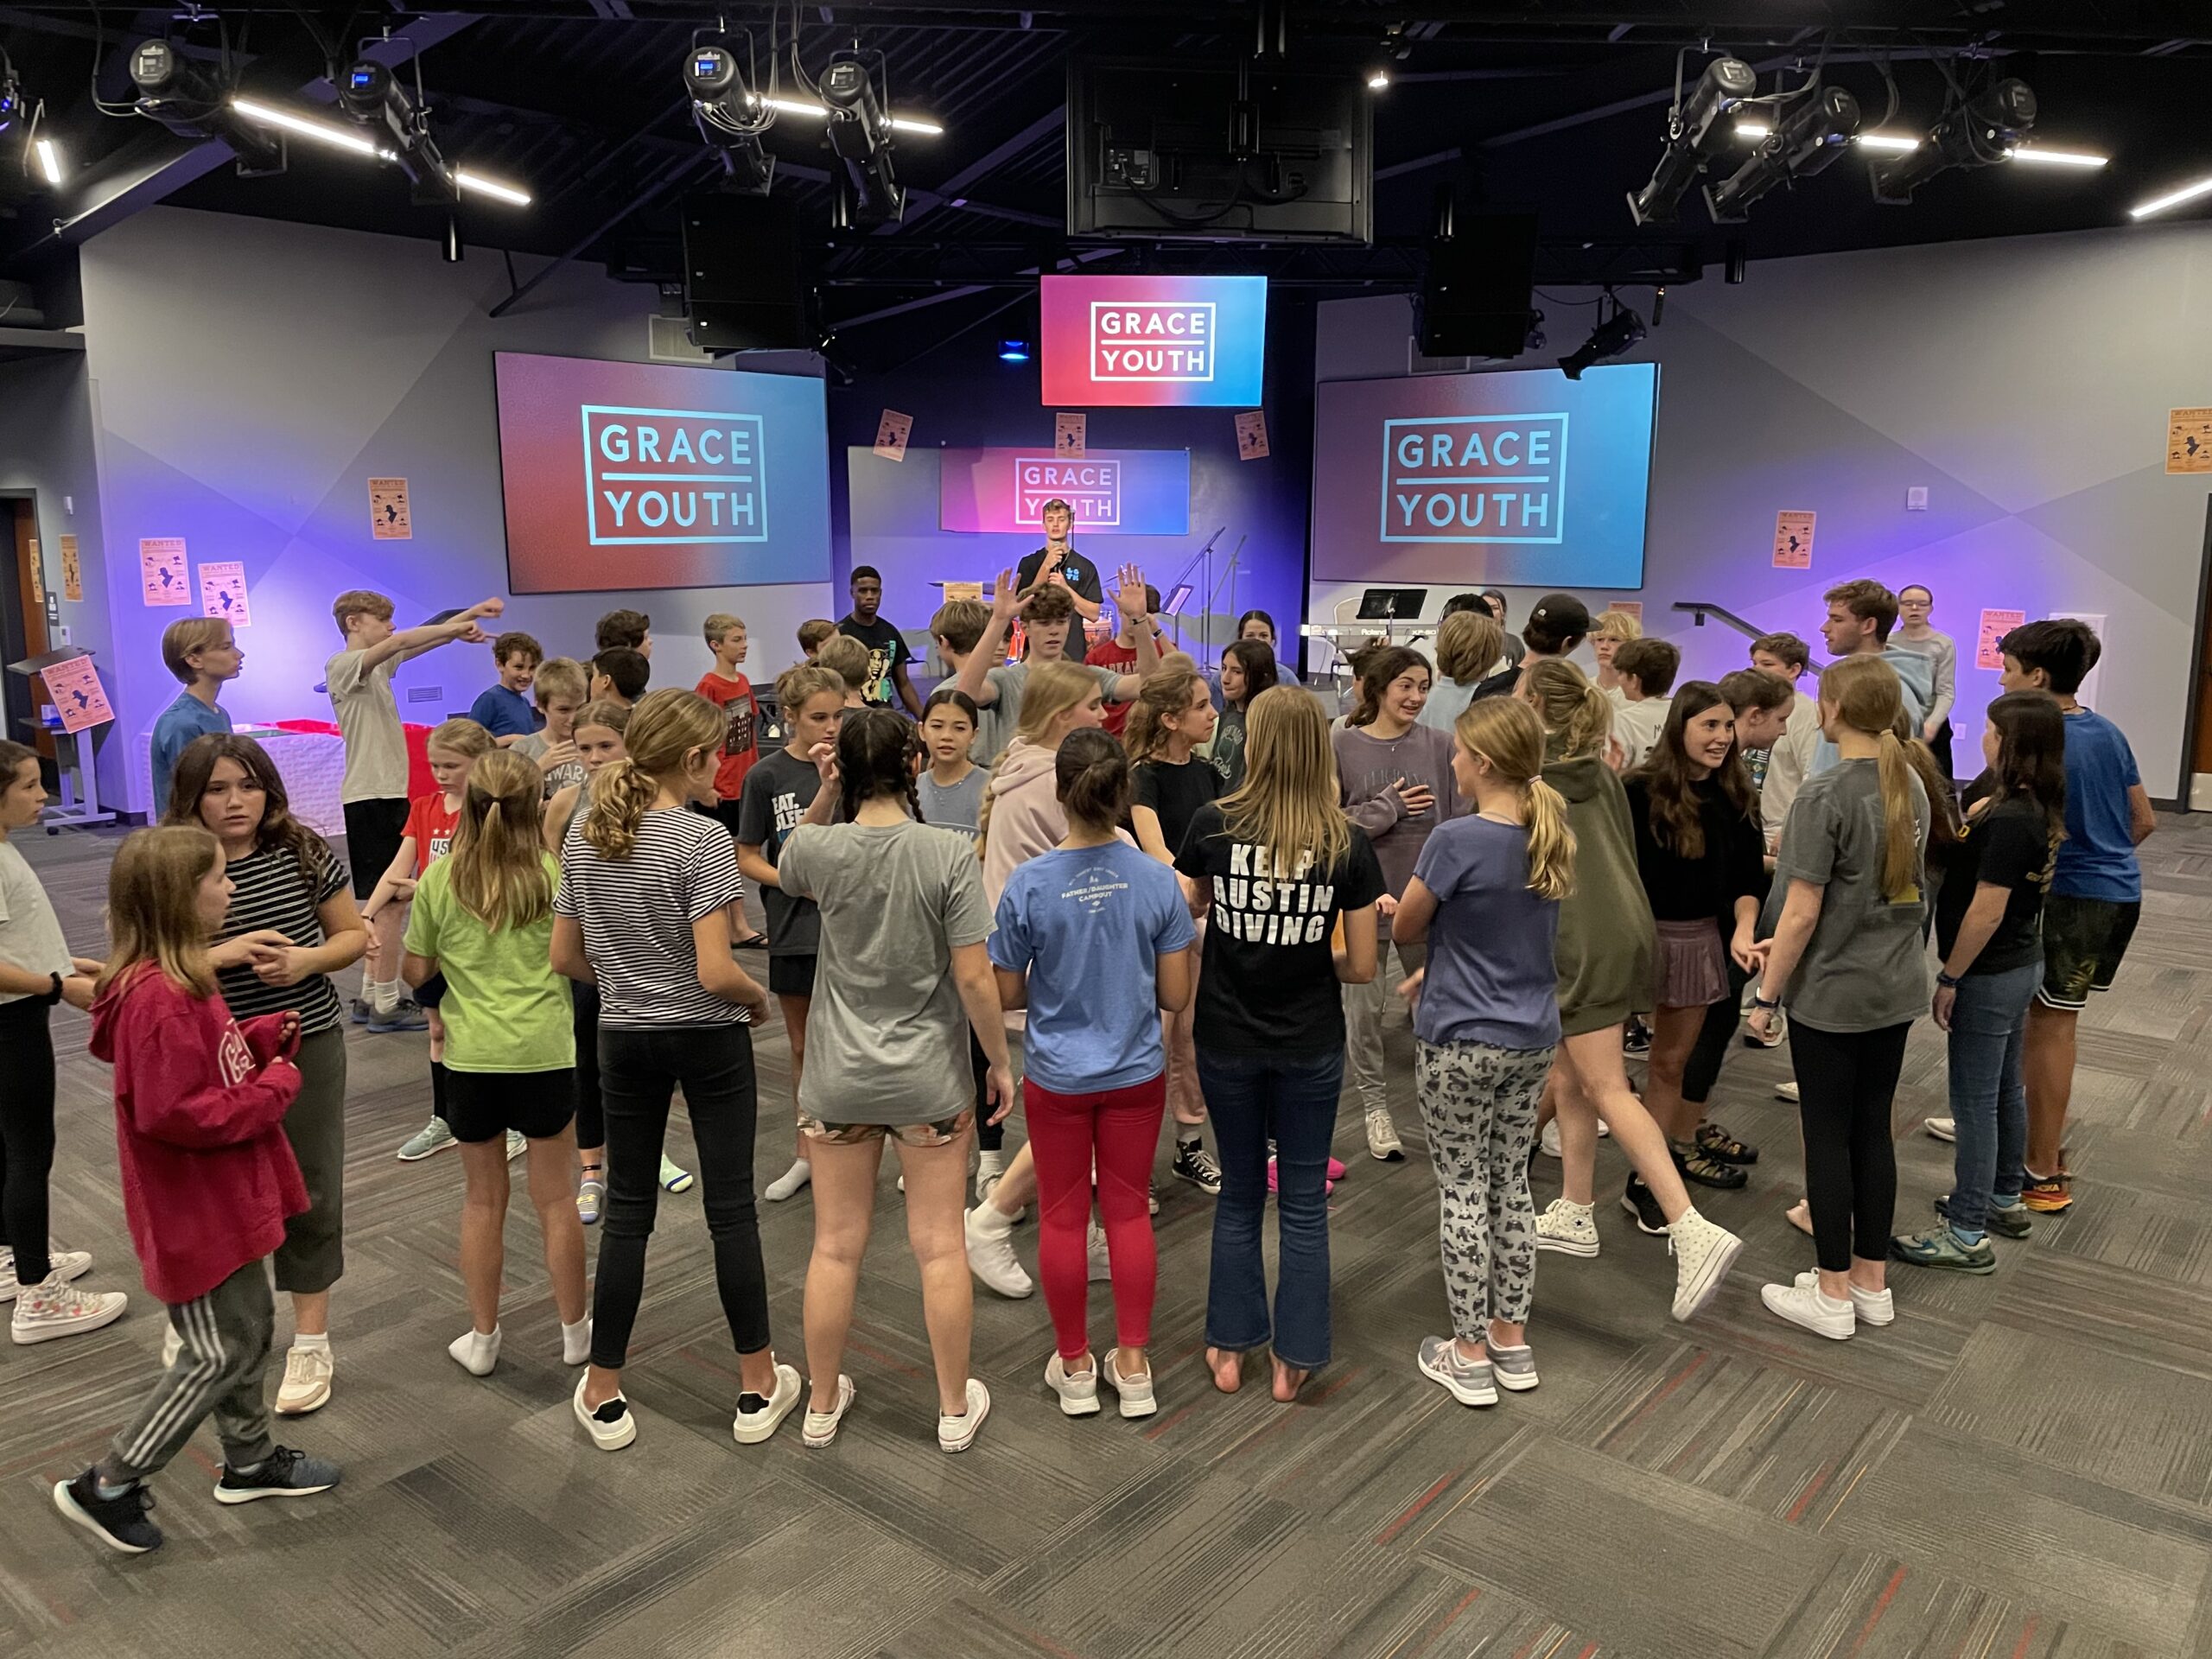 Grace Youth during a Middle School service